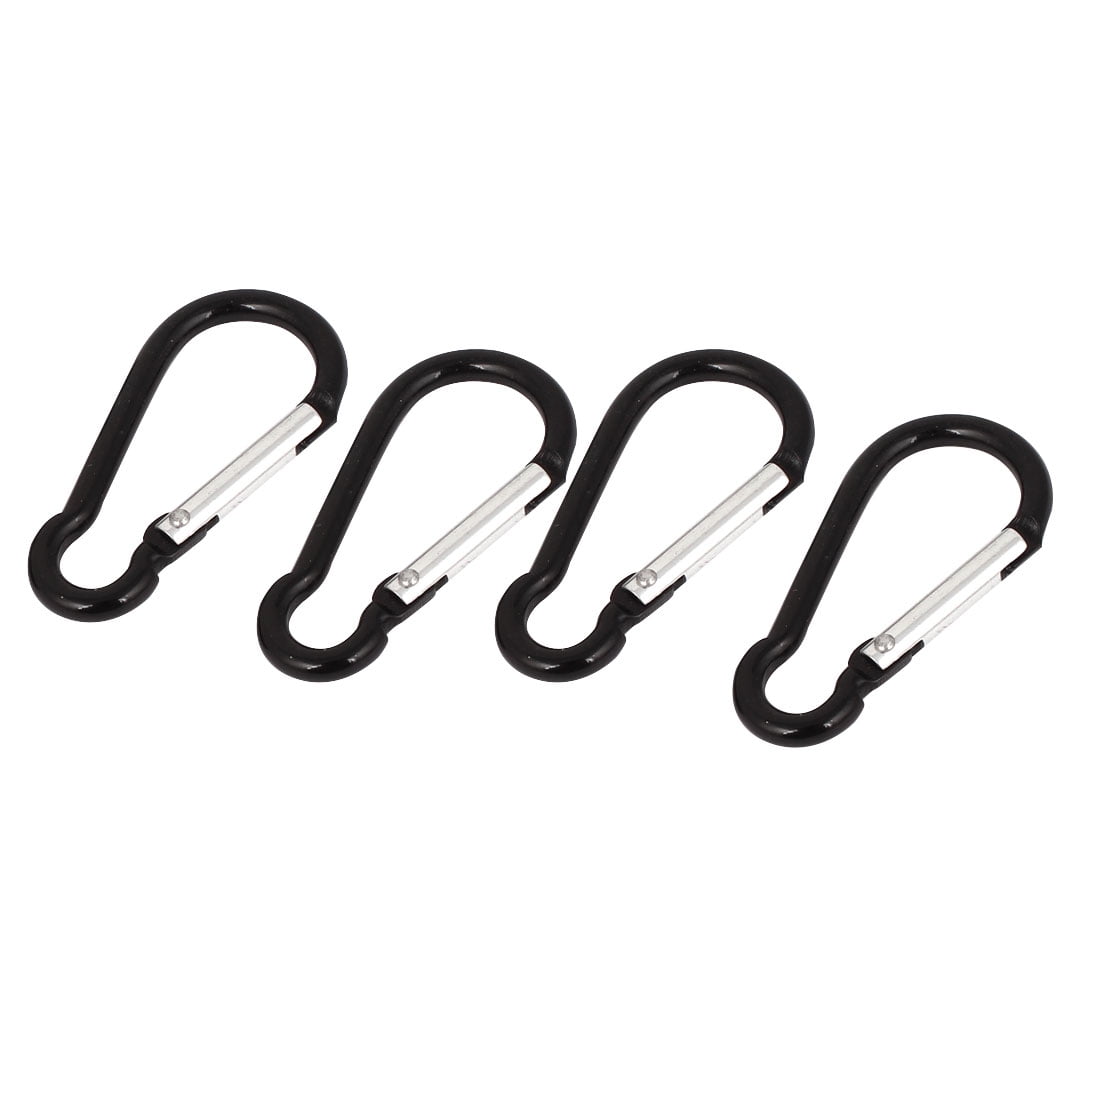 Hook It Clips Rubber Coated Stainless Steel Carabiner 